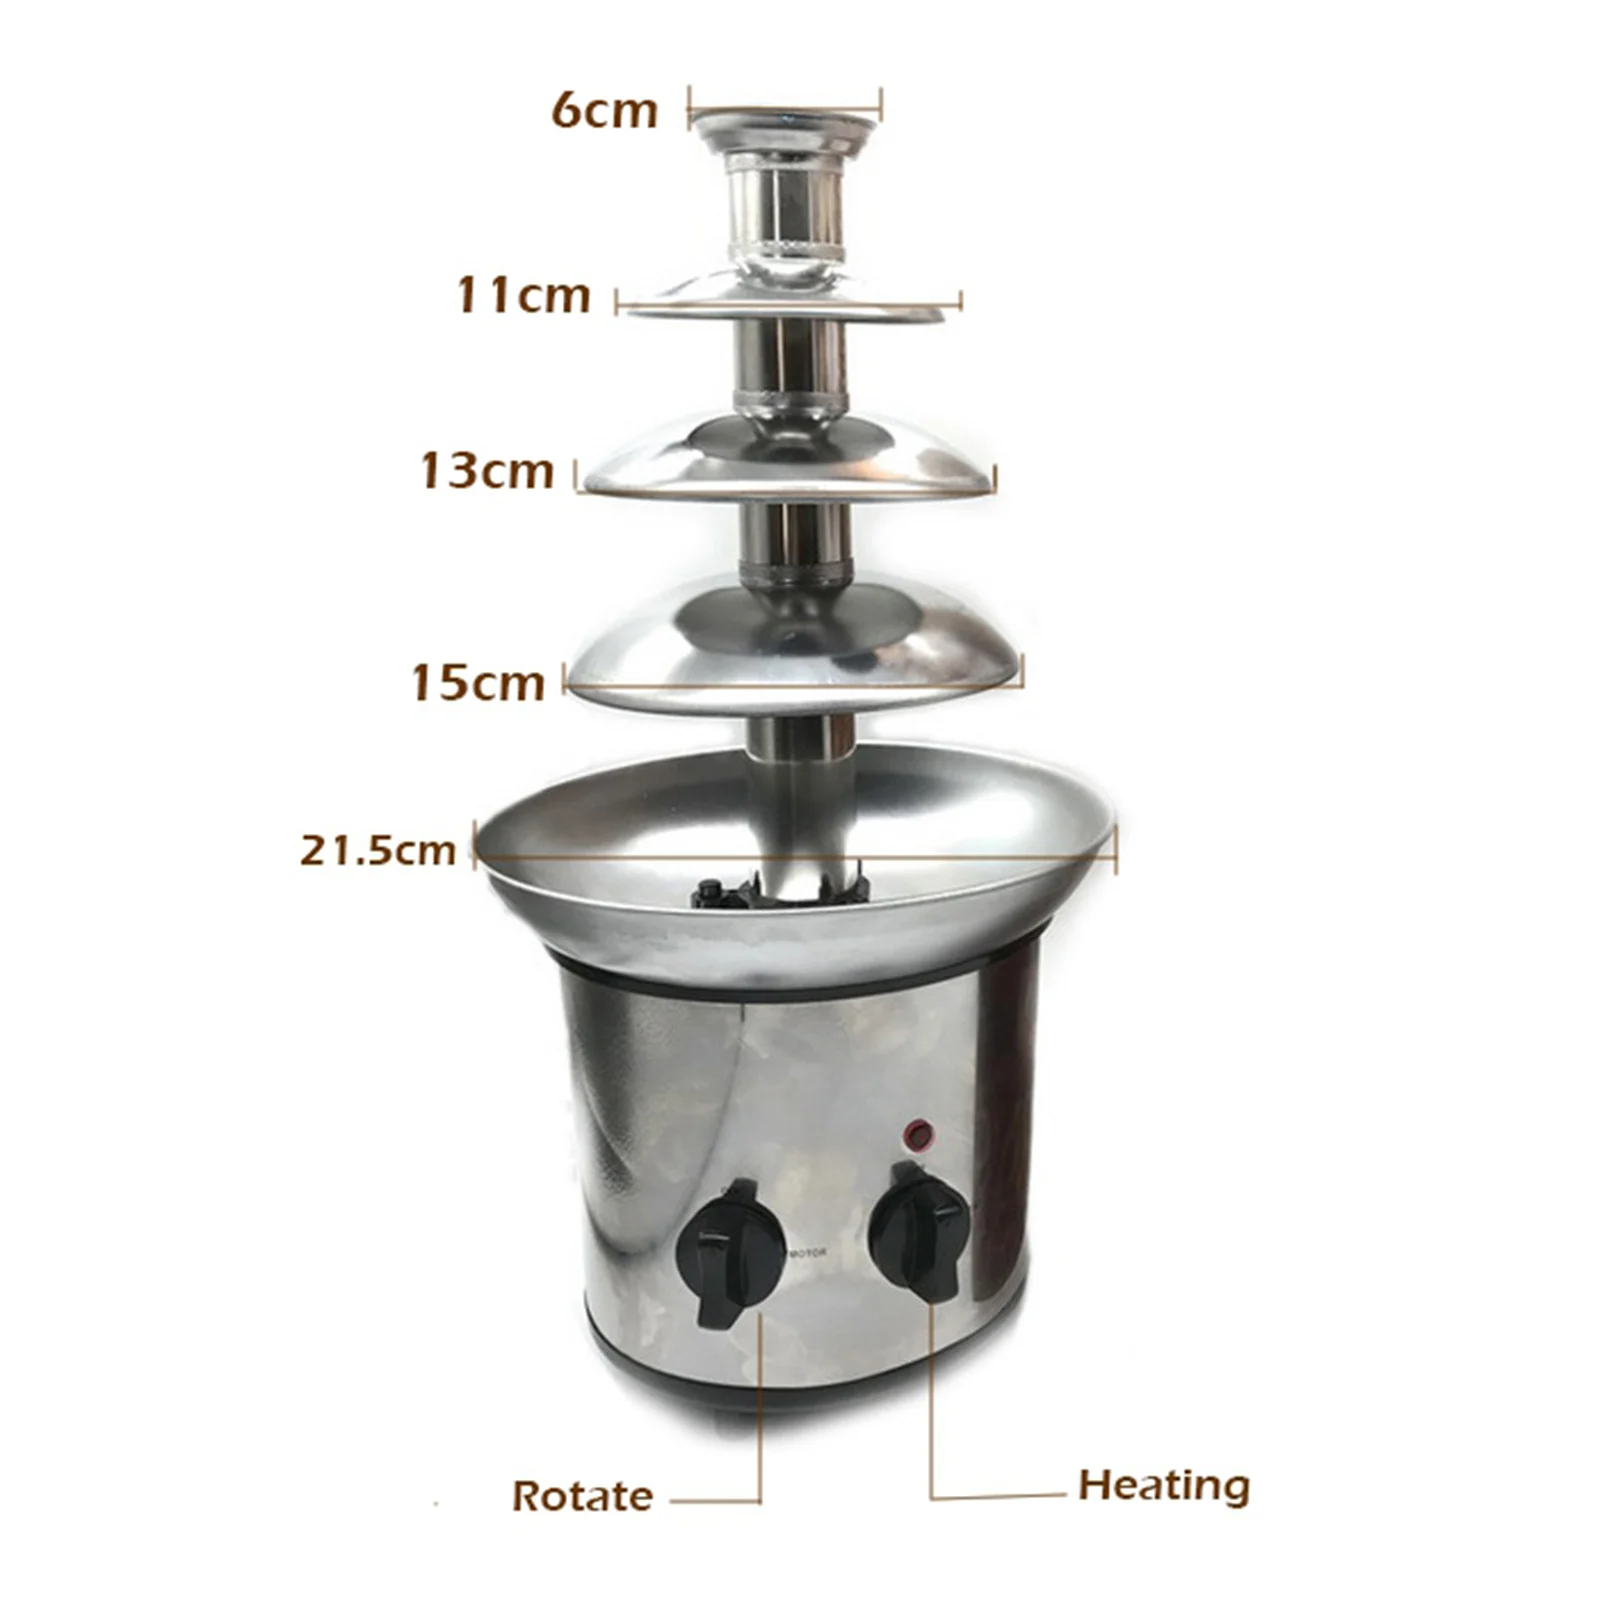 Stainless Steel 4 Tiers Chocolate Fondue Fountain for Cheese BBQ Sauce Ranch US Plug 110V